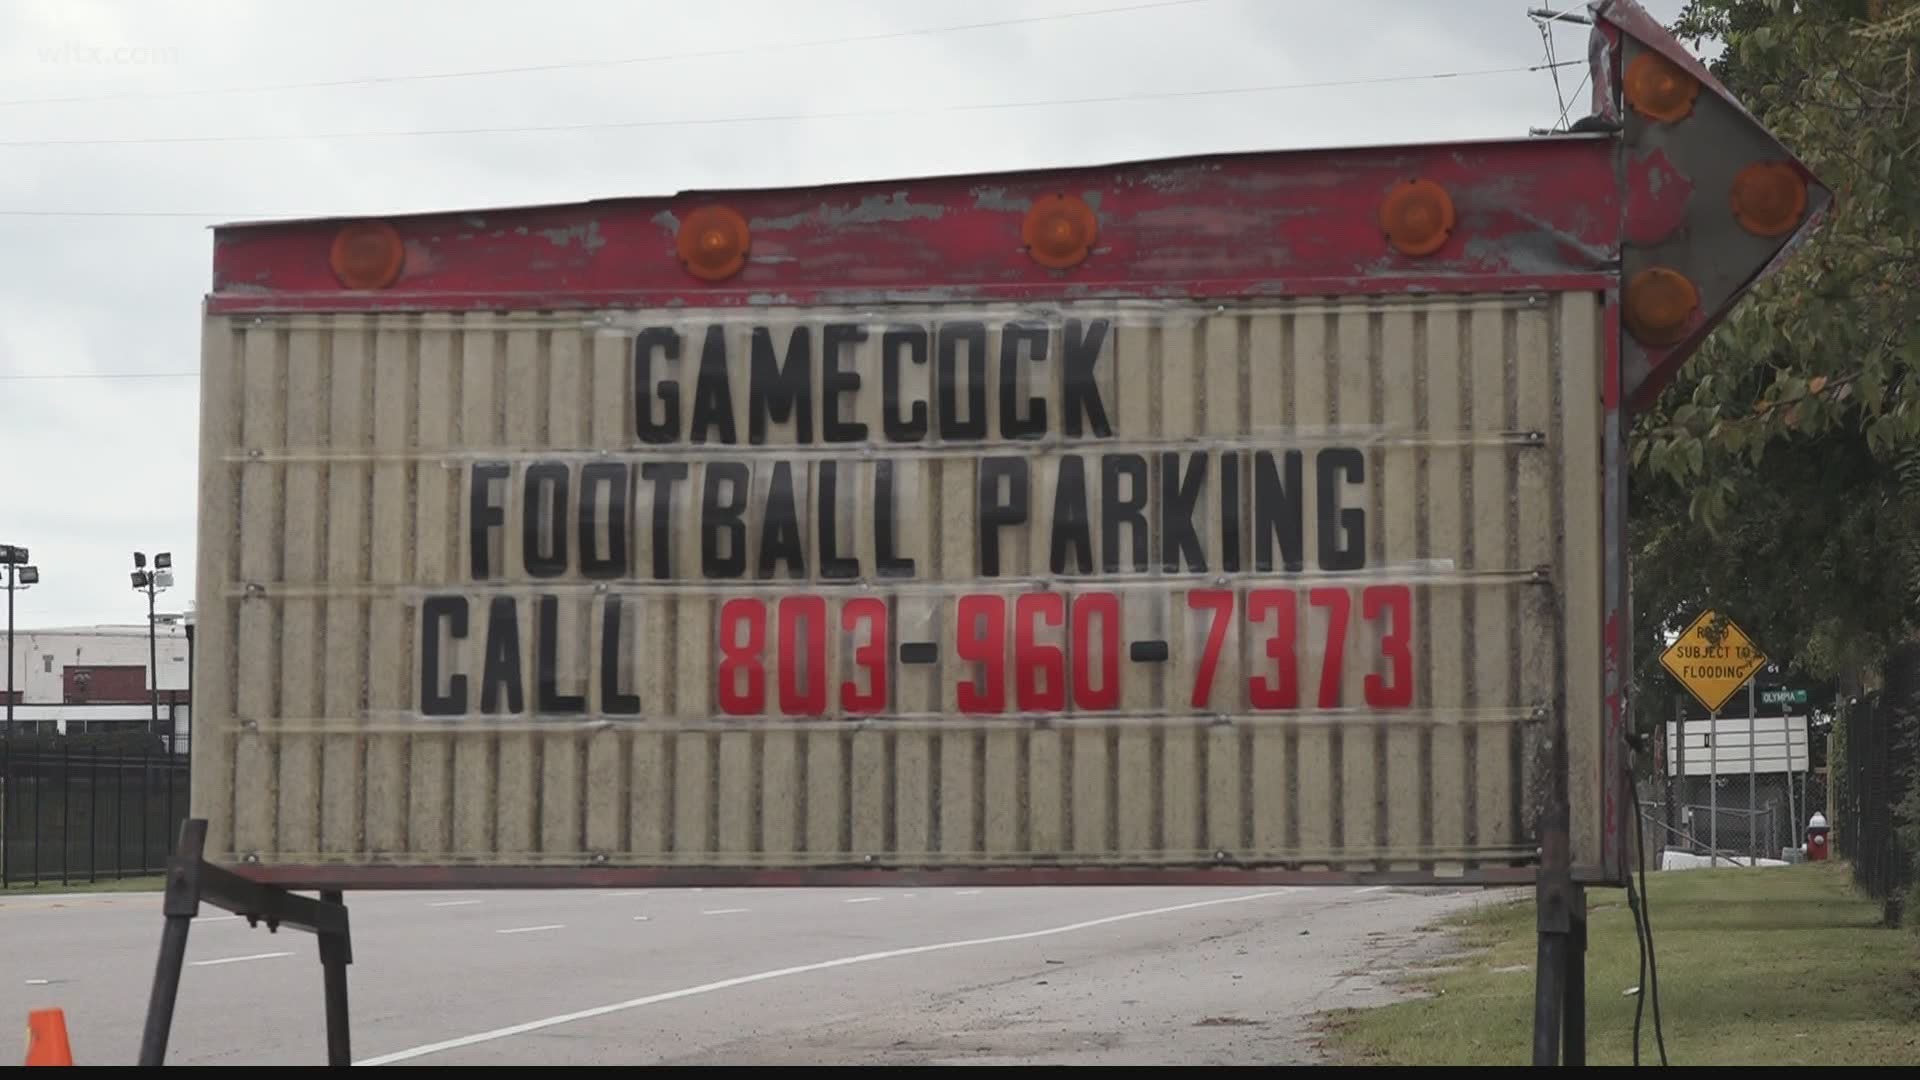 With no tailgaiting at South Carolina Gamecock football games, that will have an effect on businesses.